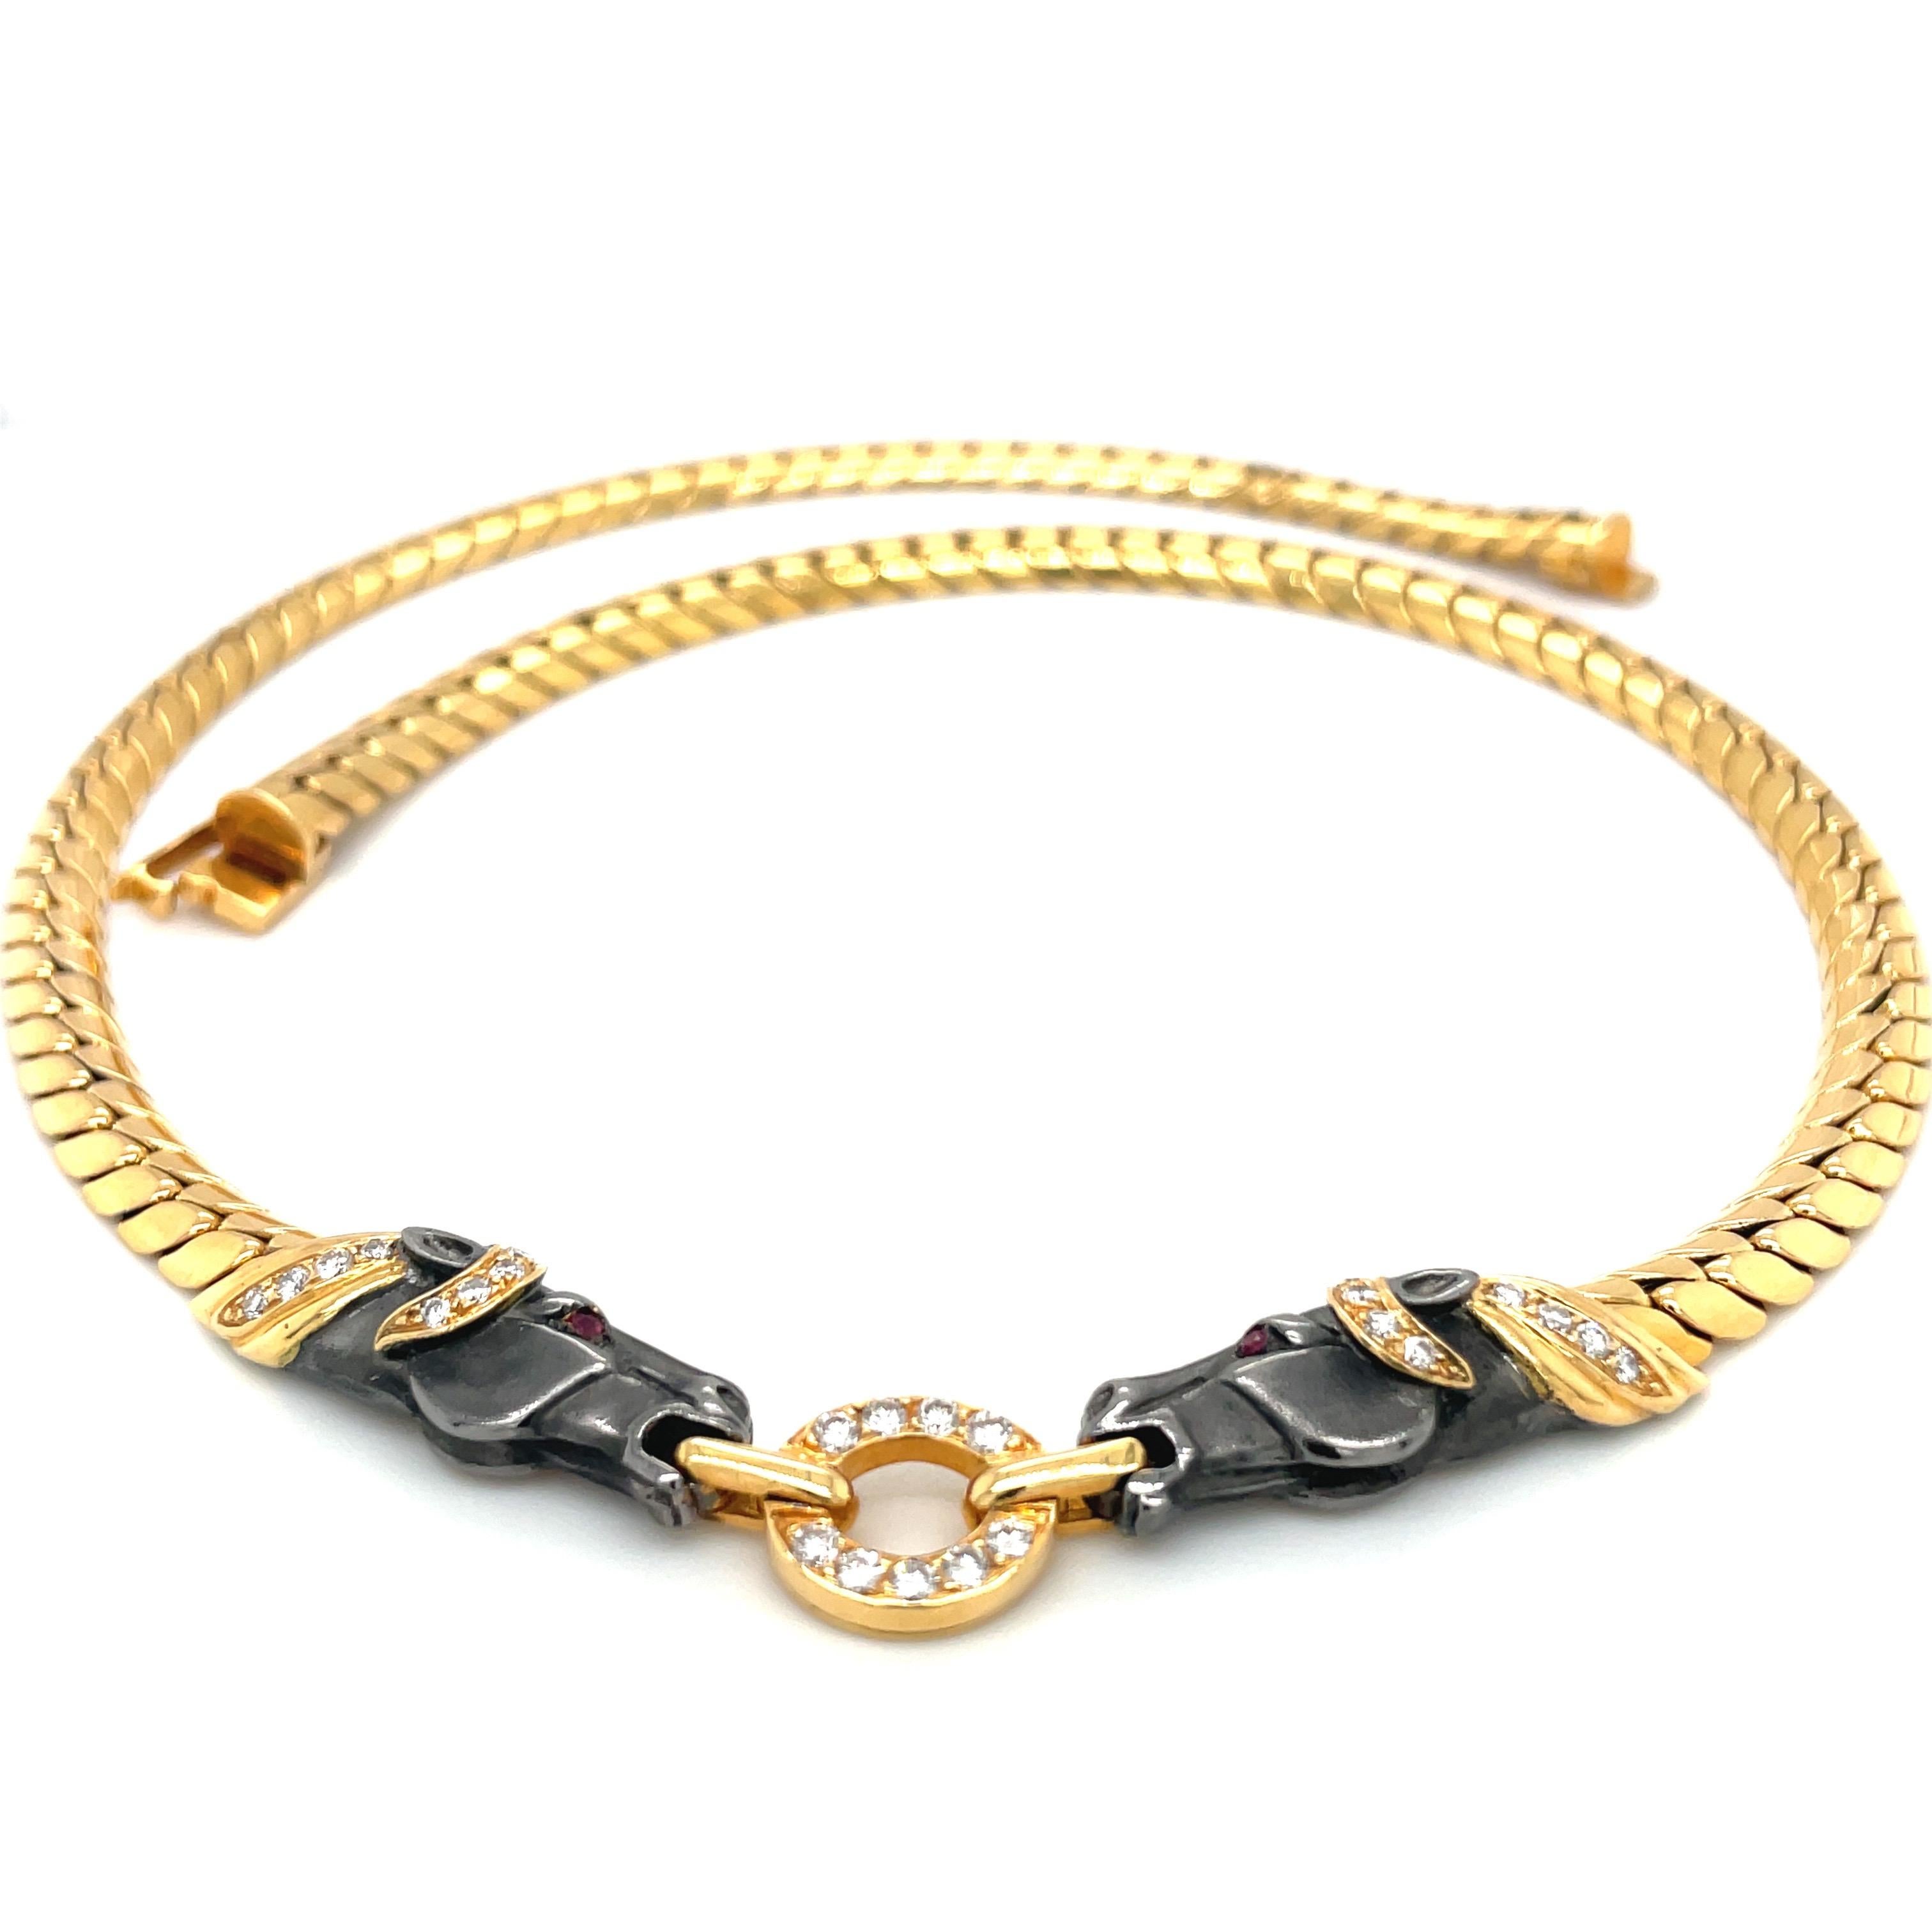 An 18 karat yellow gold choker necklace. The center of the necklace is set with 2 blackened gold horse heads facing each other. Their manes are set round brilliant diamonds as well as the ring they hold in their mouth. Their eyes are set with